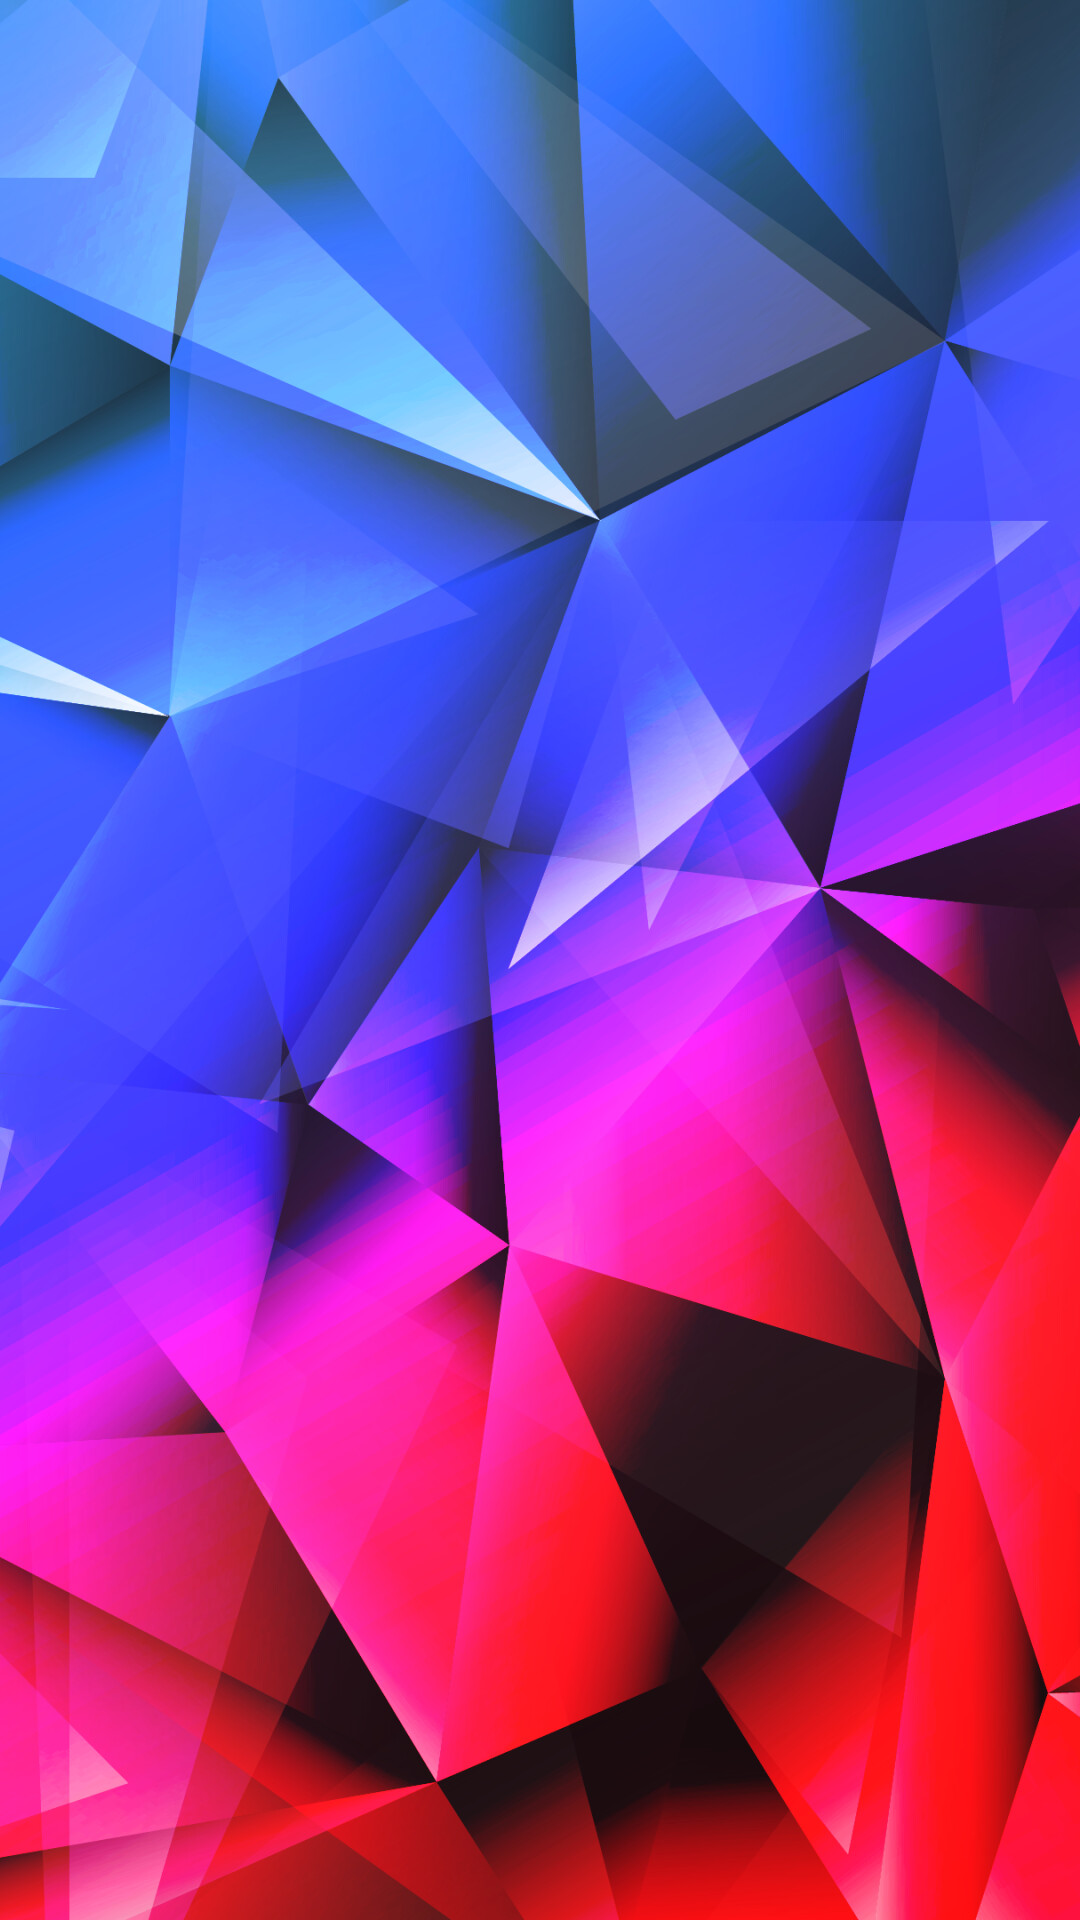 Geometry: Red, Blue, Polygonal shapes, Triangles, Straight angles. 1080x1920 Full HD Background.